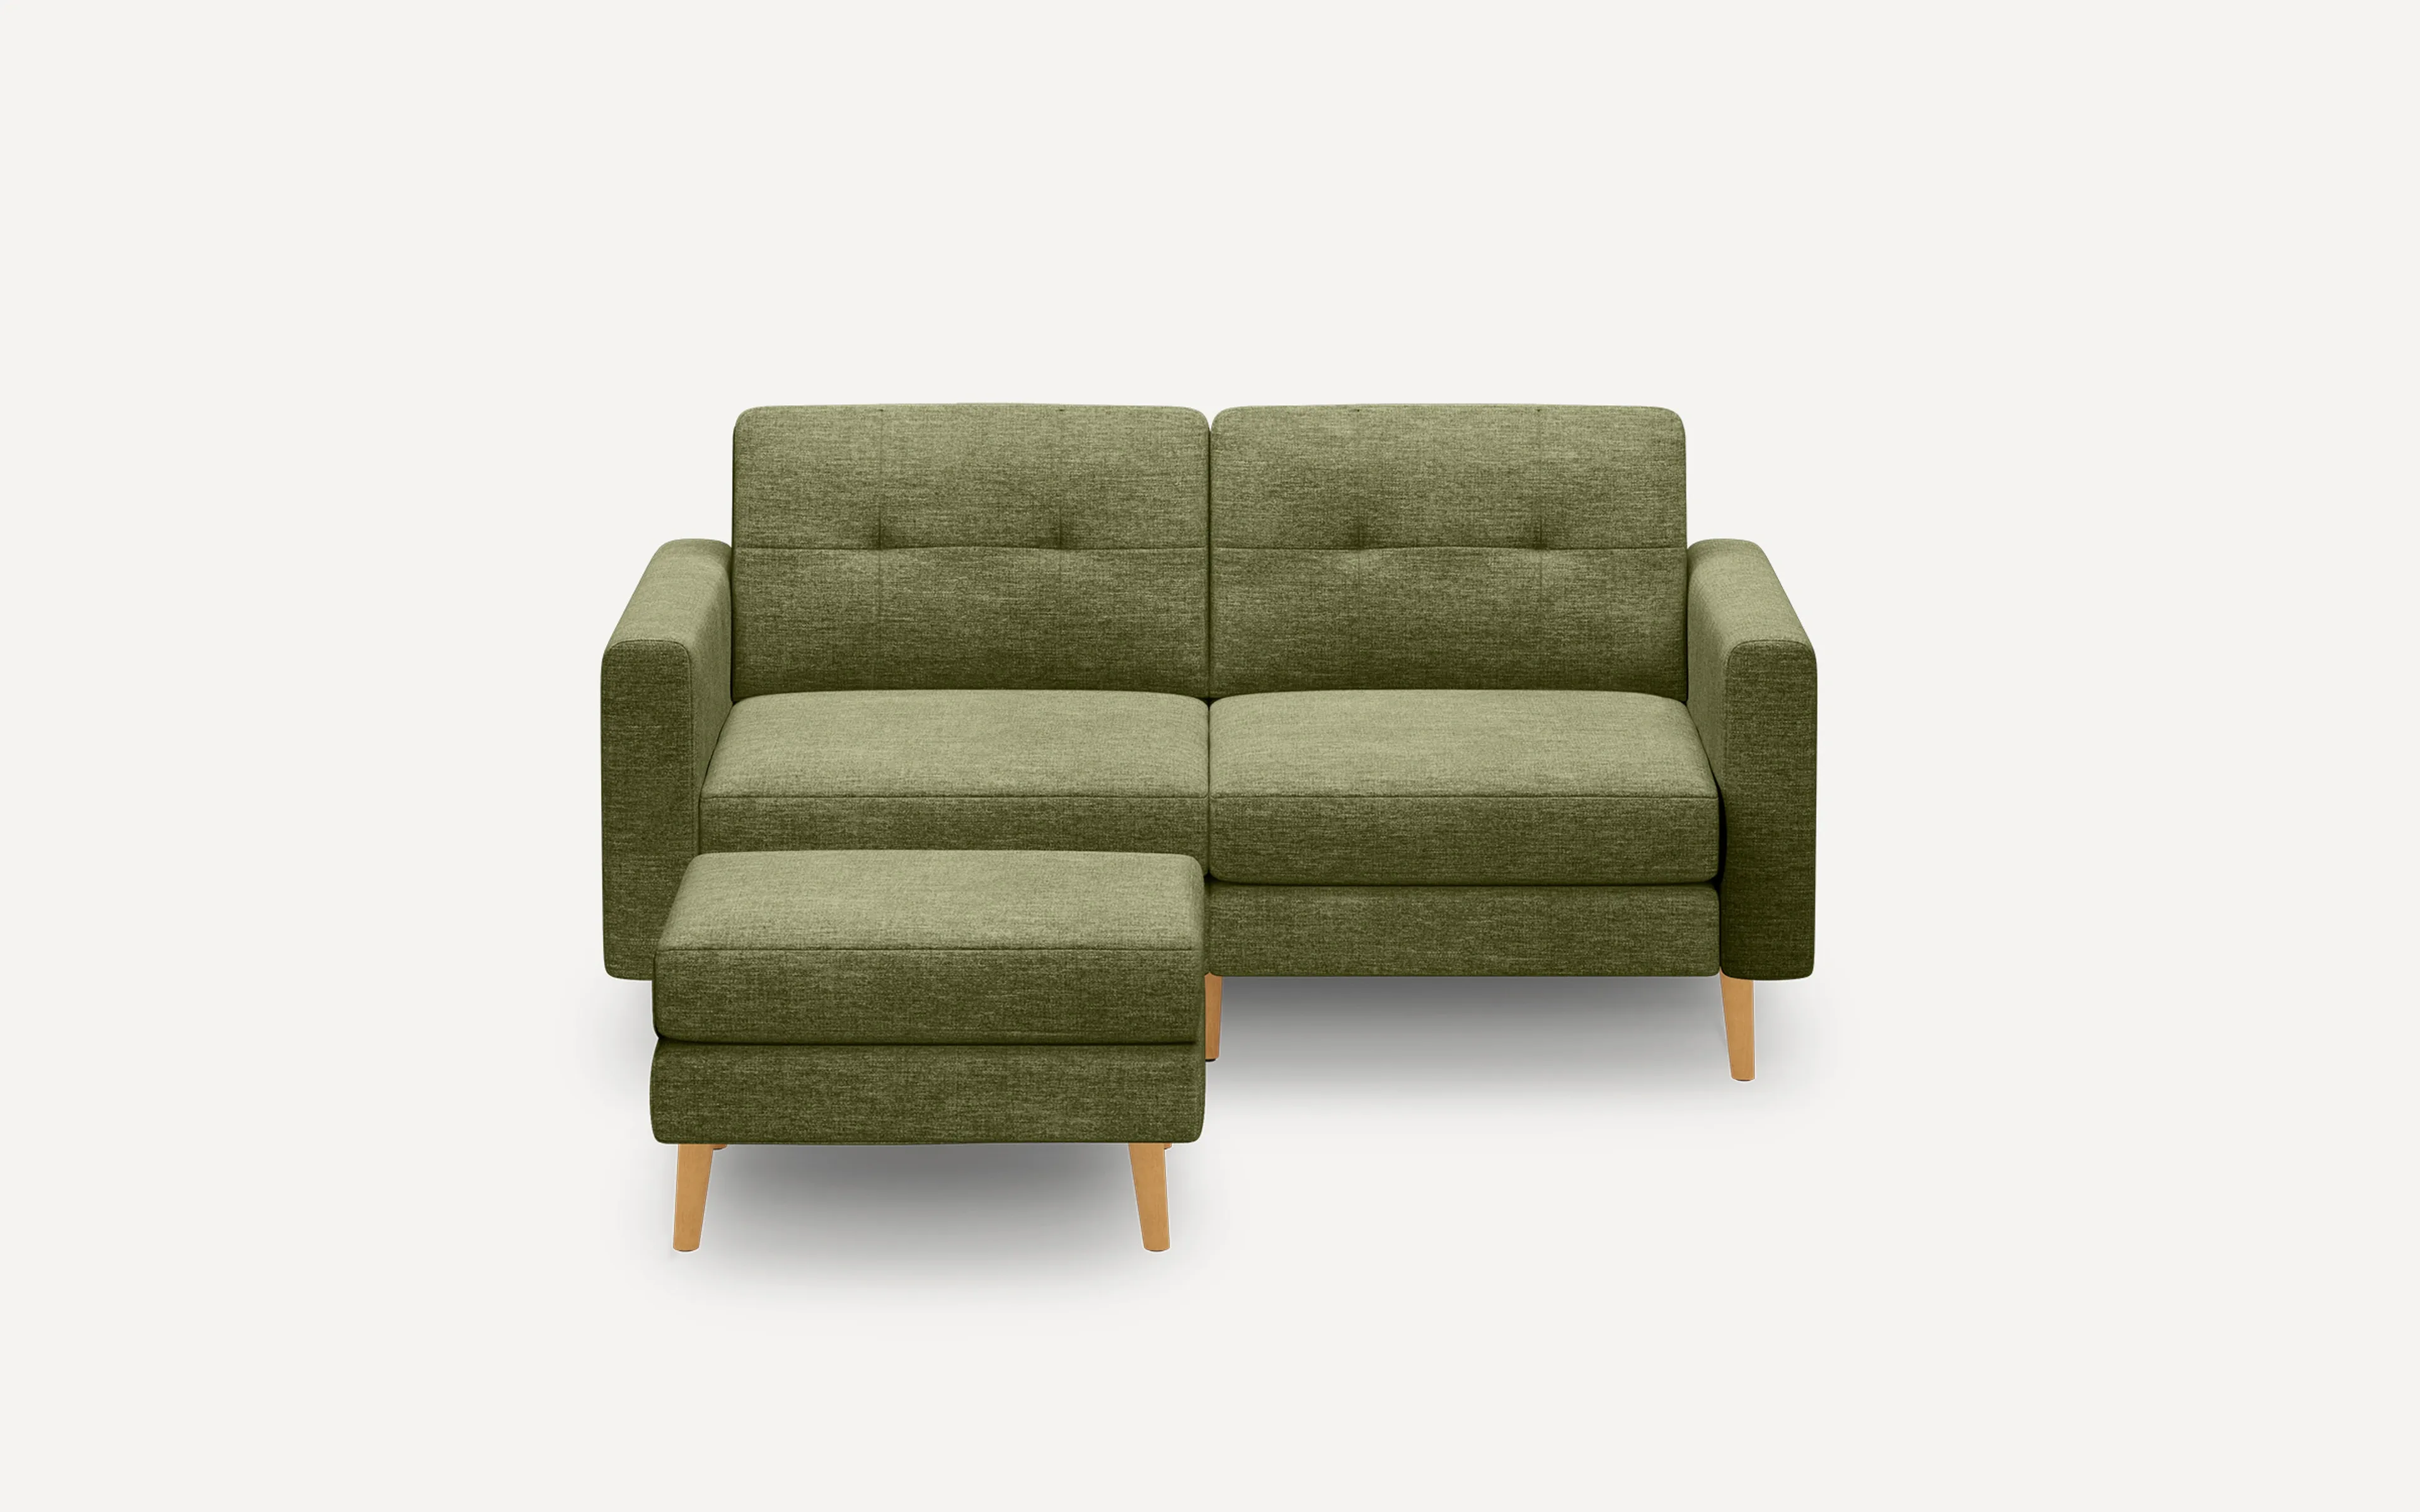 Original Nomad Loveseat with Ottoman in Moss Green Fabric